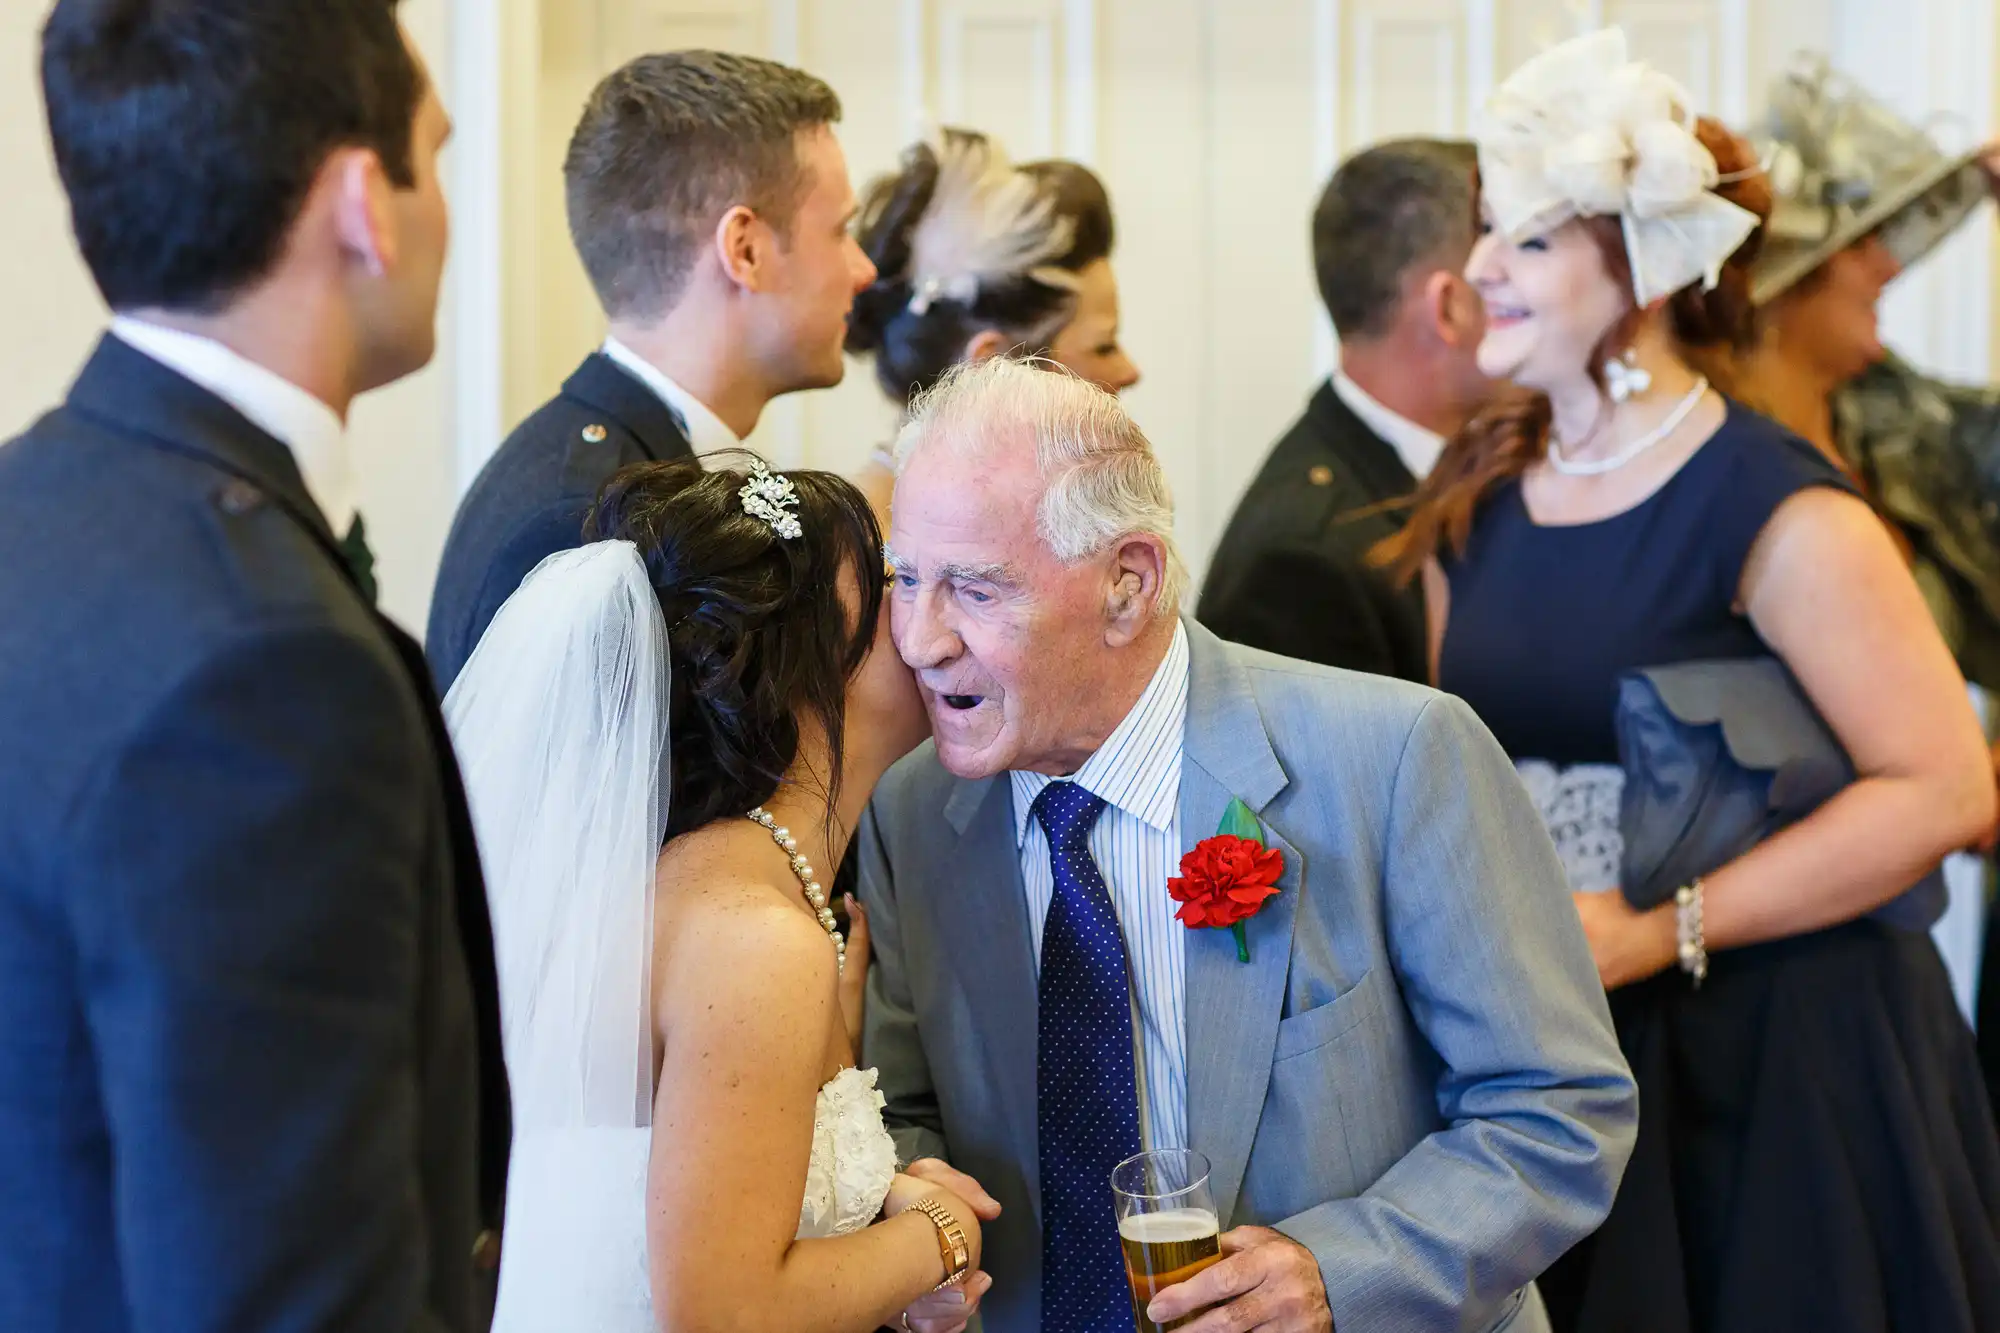 Elderly man in a suit with a red flower pin sharing a joyful moment with a bride at a wedding reception, surrounded by other guests.